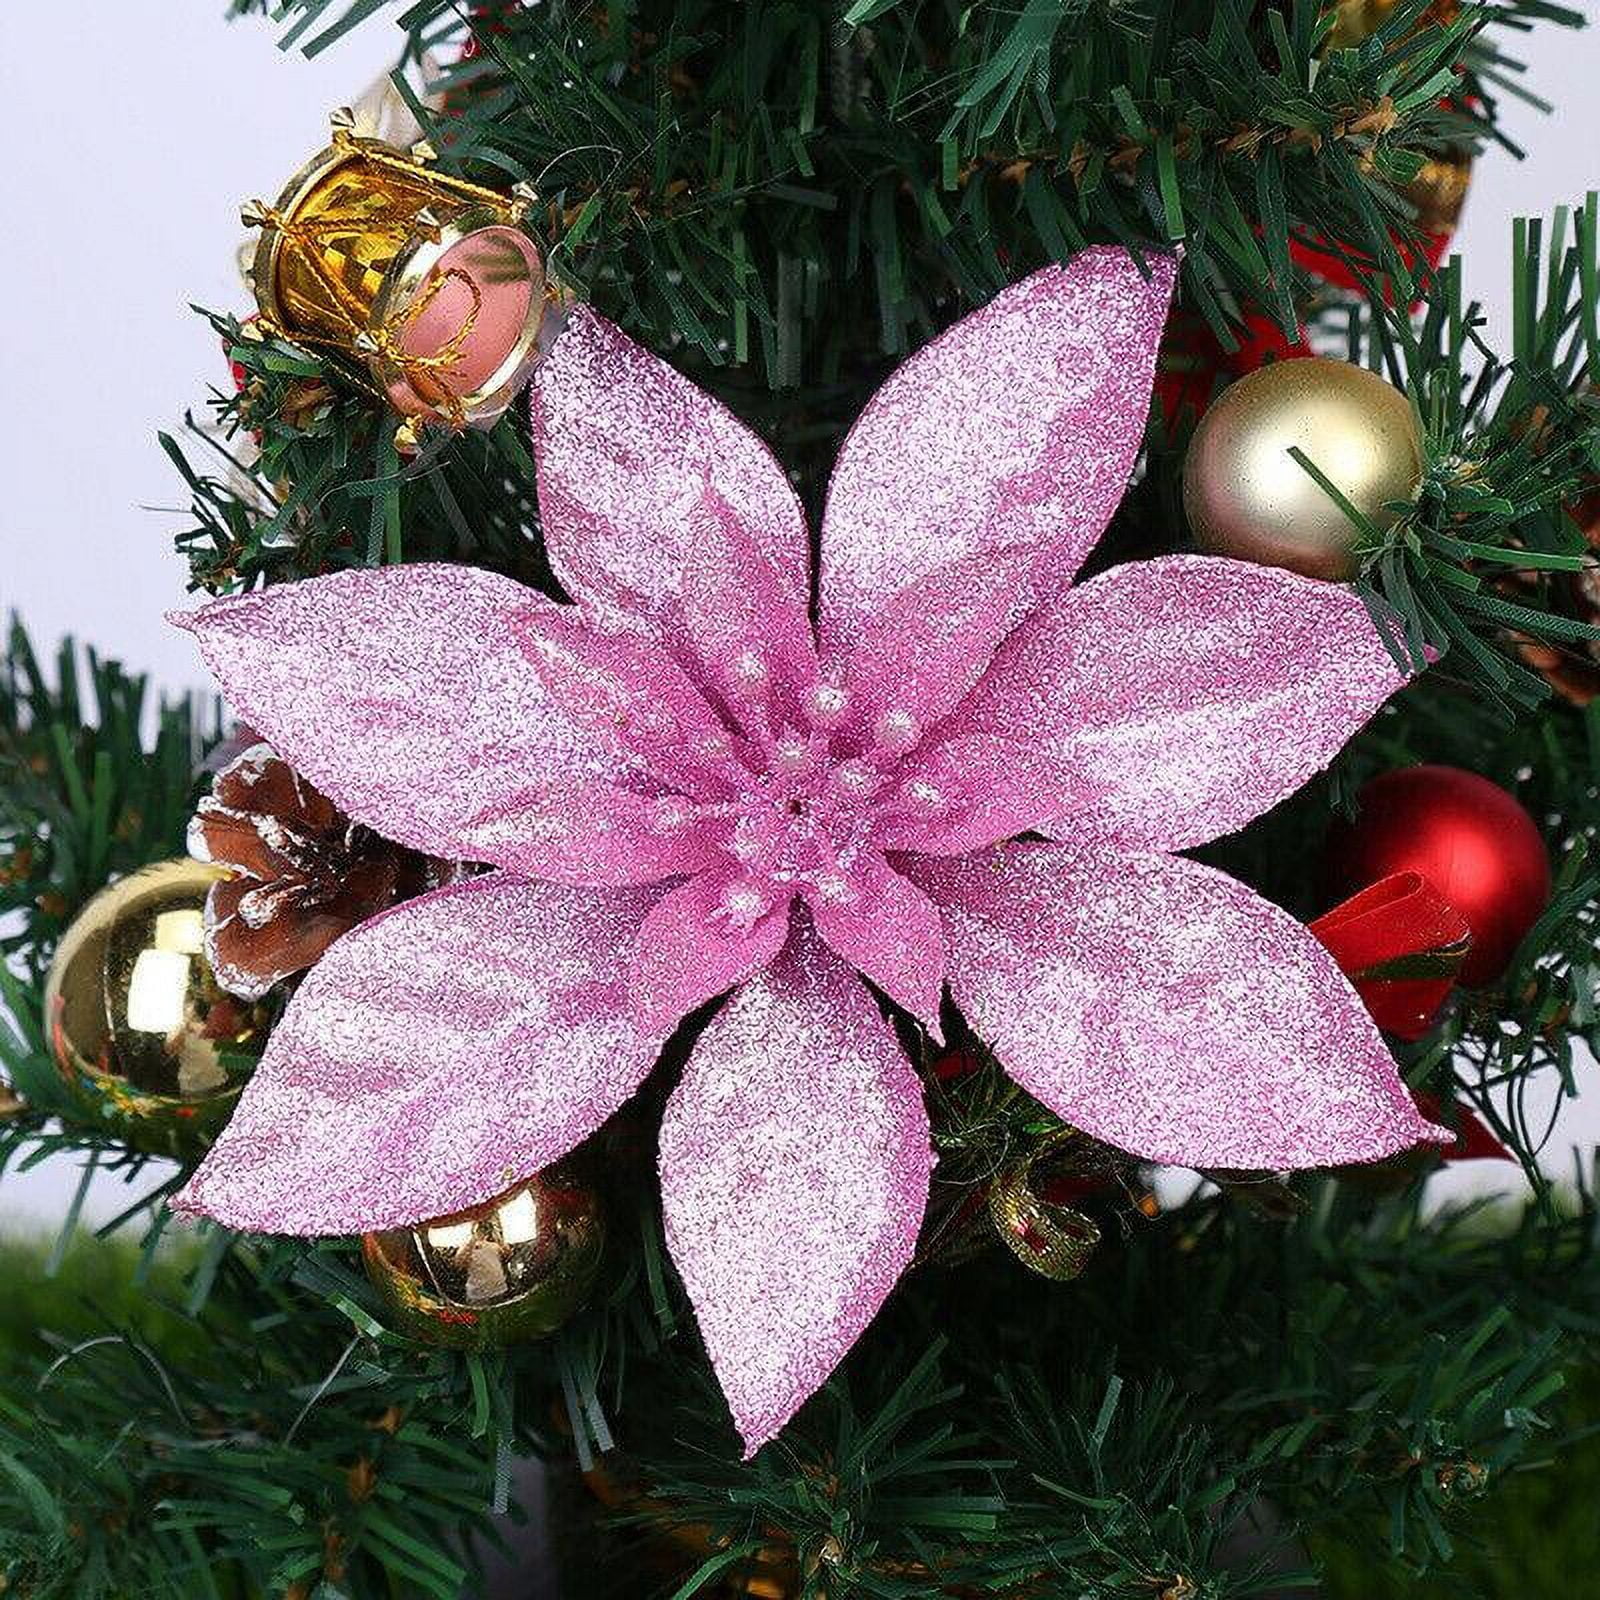 Floweroyal 24pcs Poinsettia Artificial Christmas Flowers Decorations with  Clips and Stems 5.5/14CM Glitter Ornaments for Christmas Tree Wreath